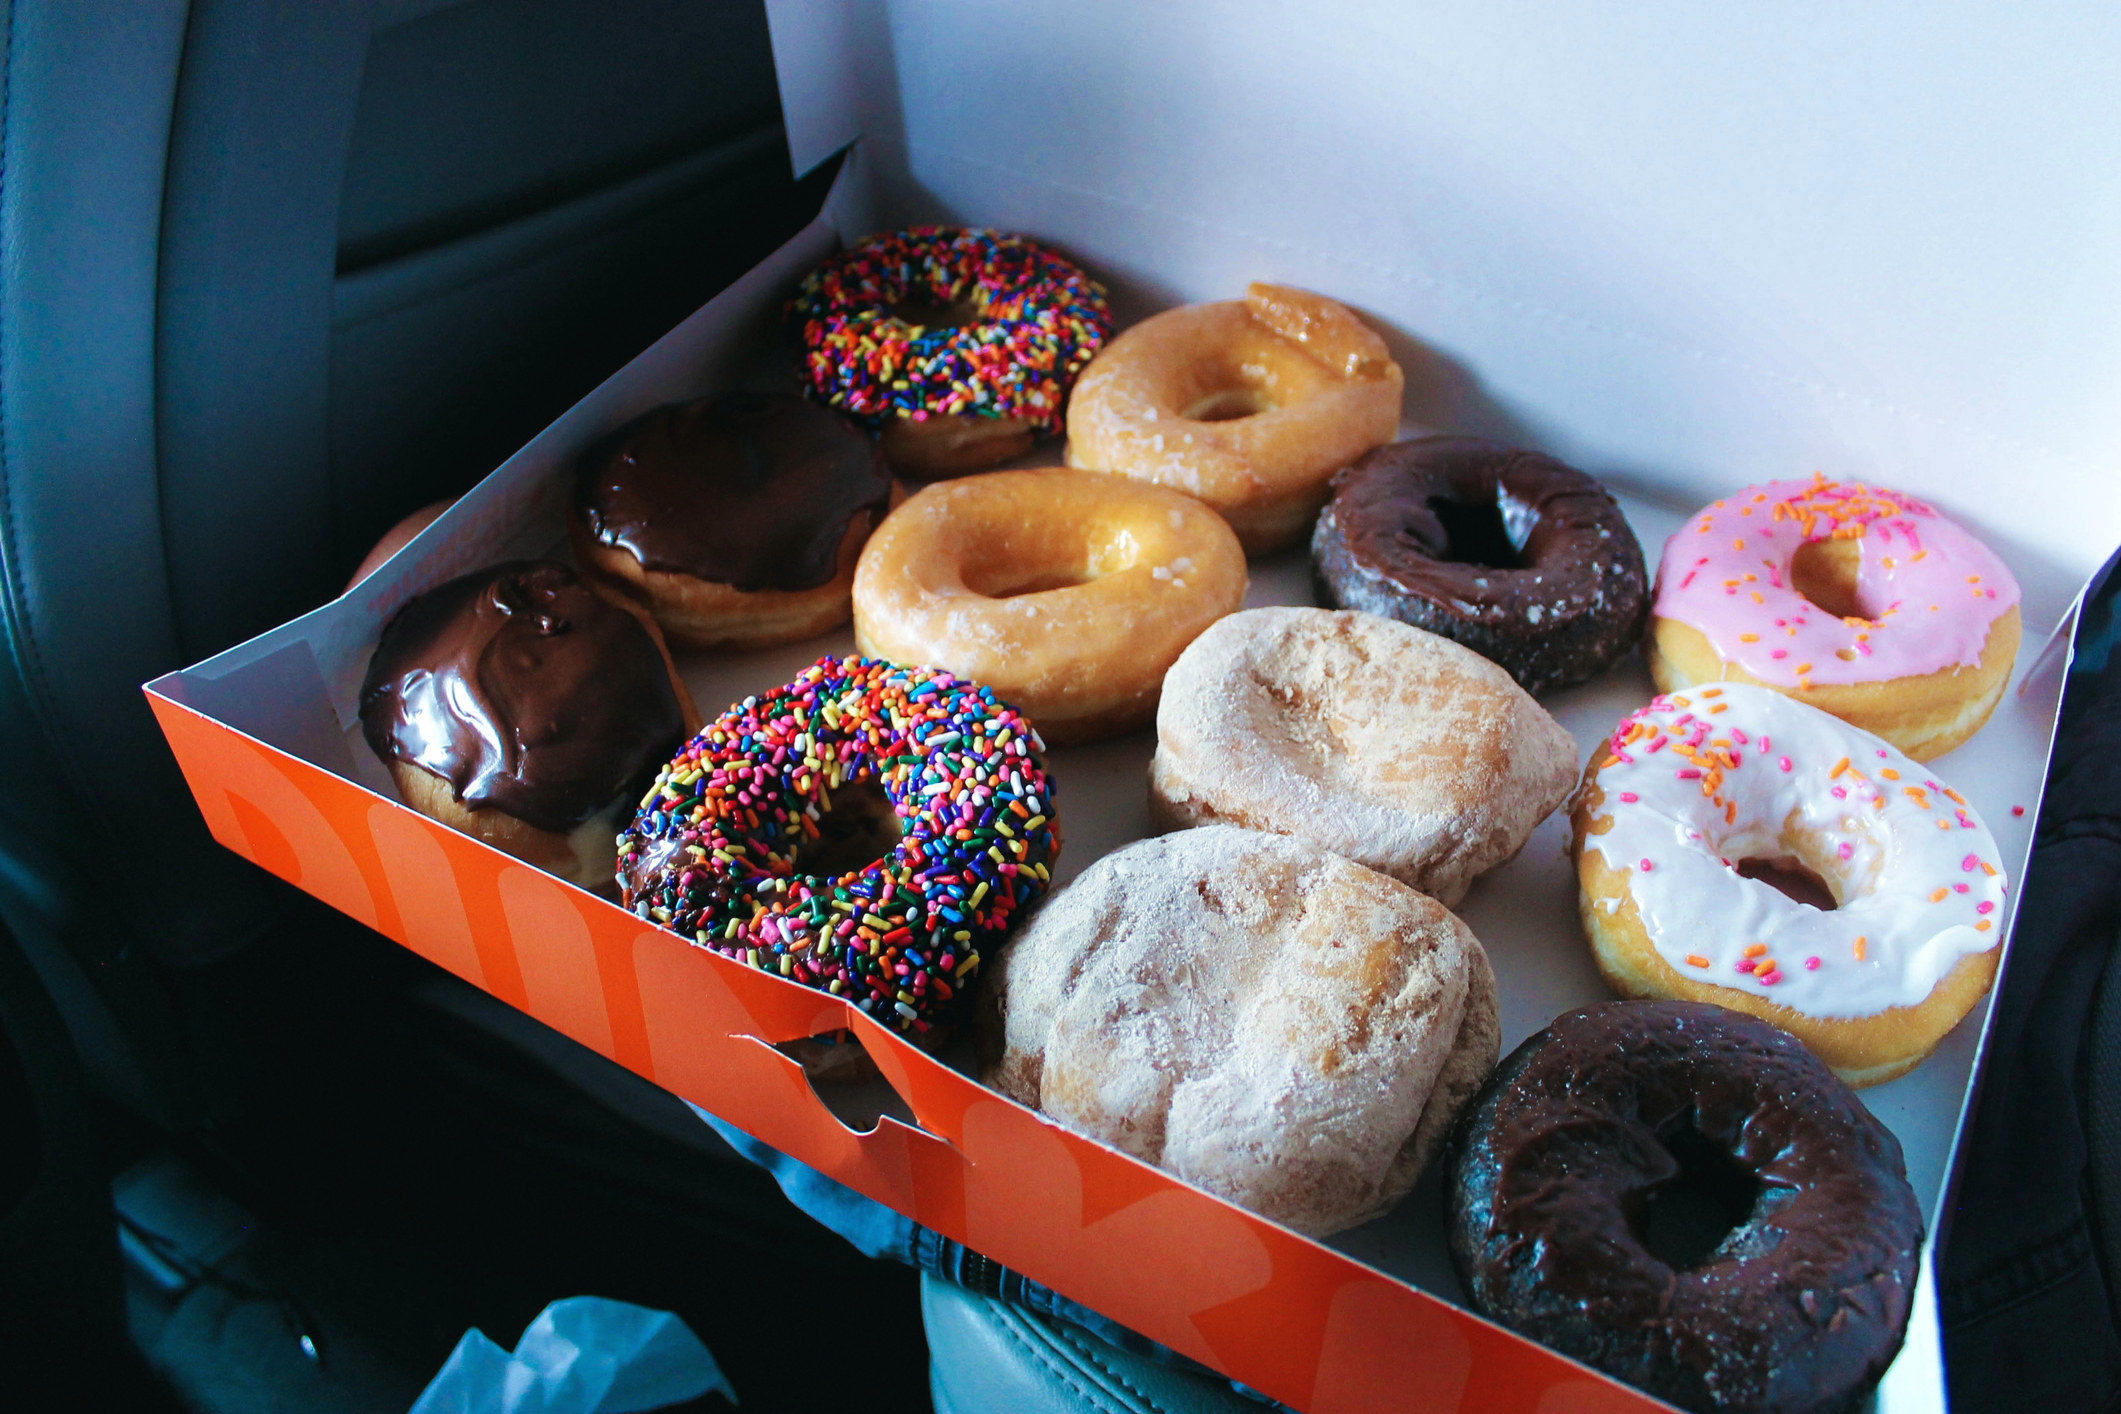 A box of different donuts.